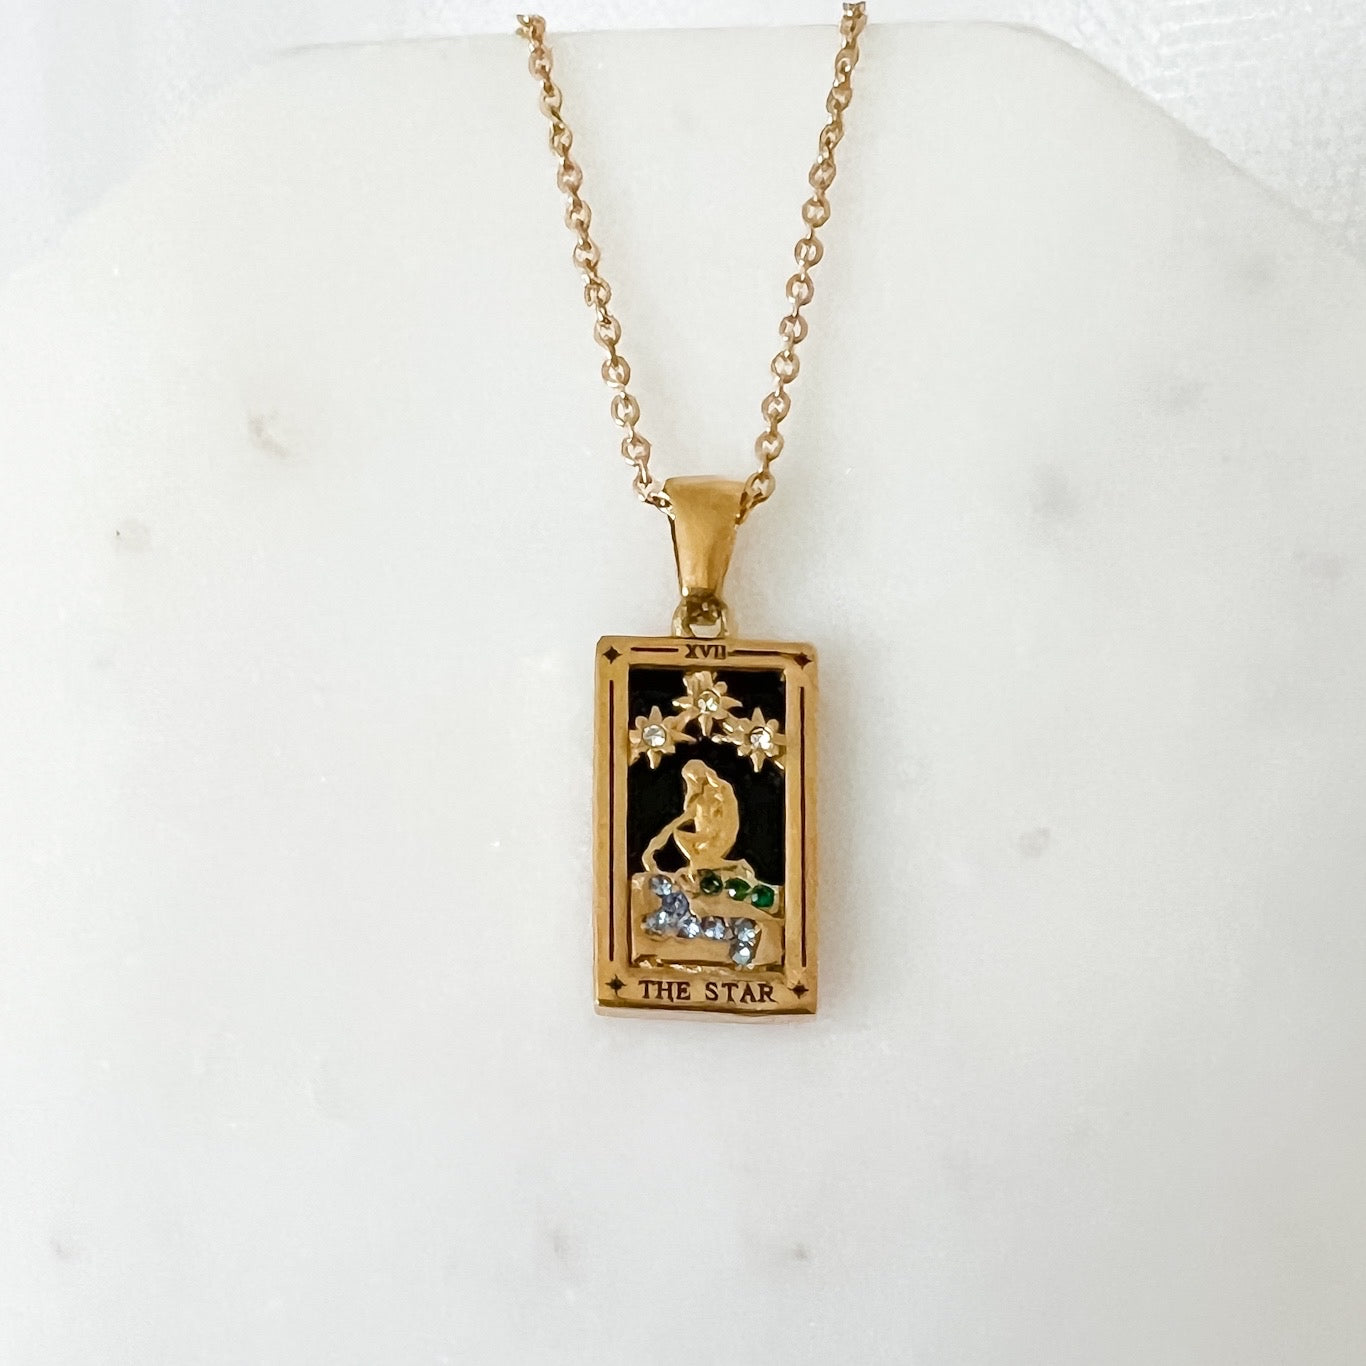 Bronze Star Tarot Card Necklace with Gold Fill Chain